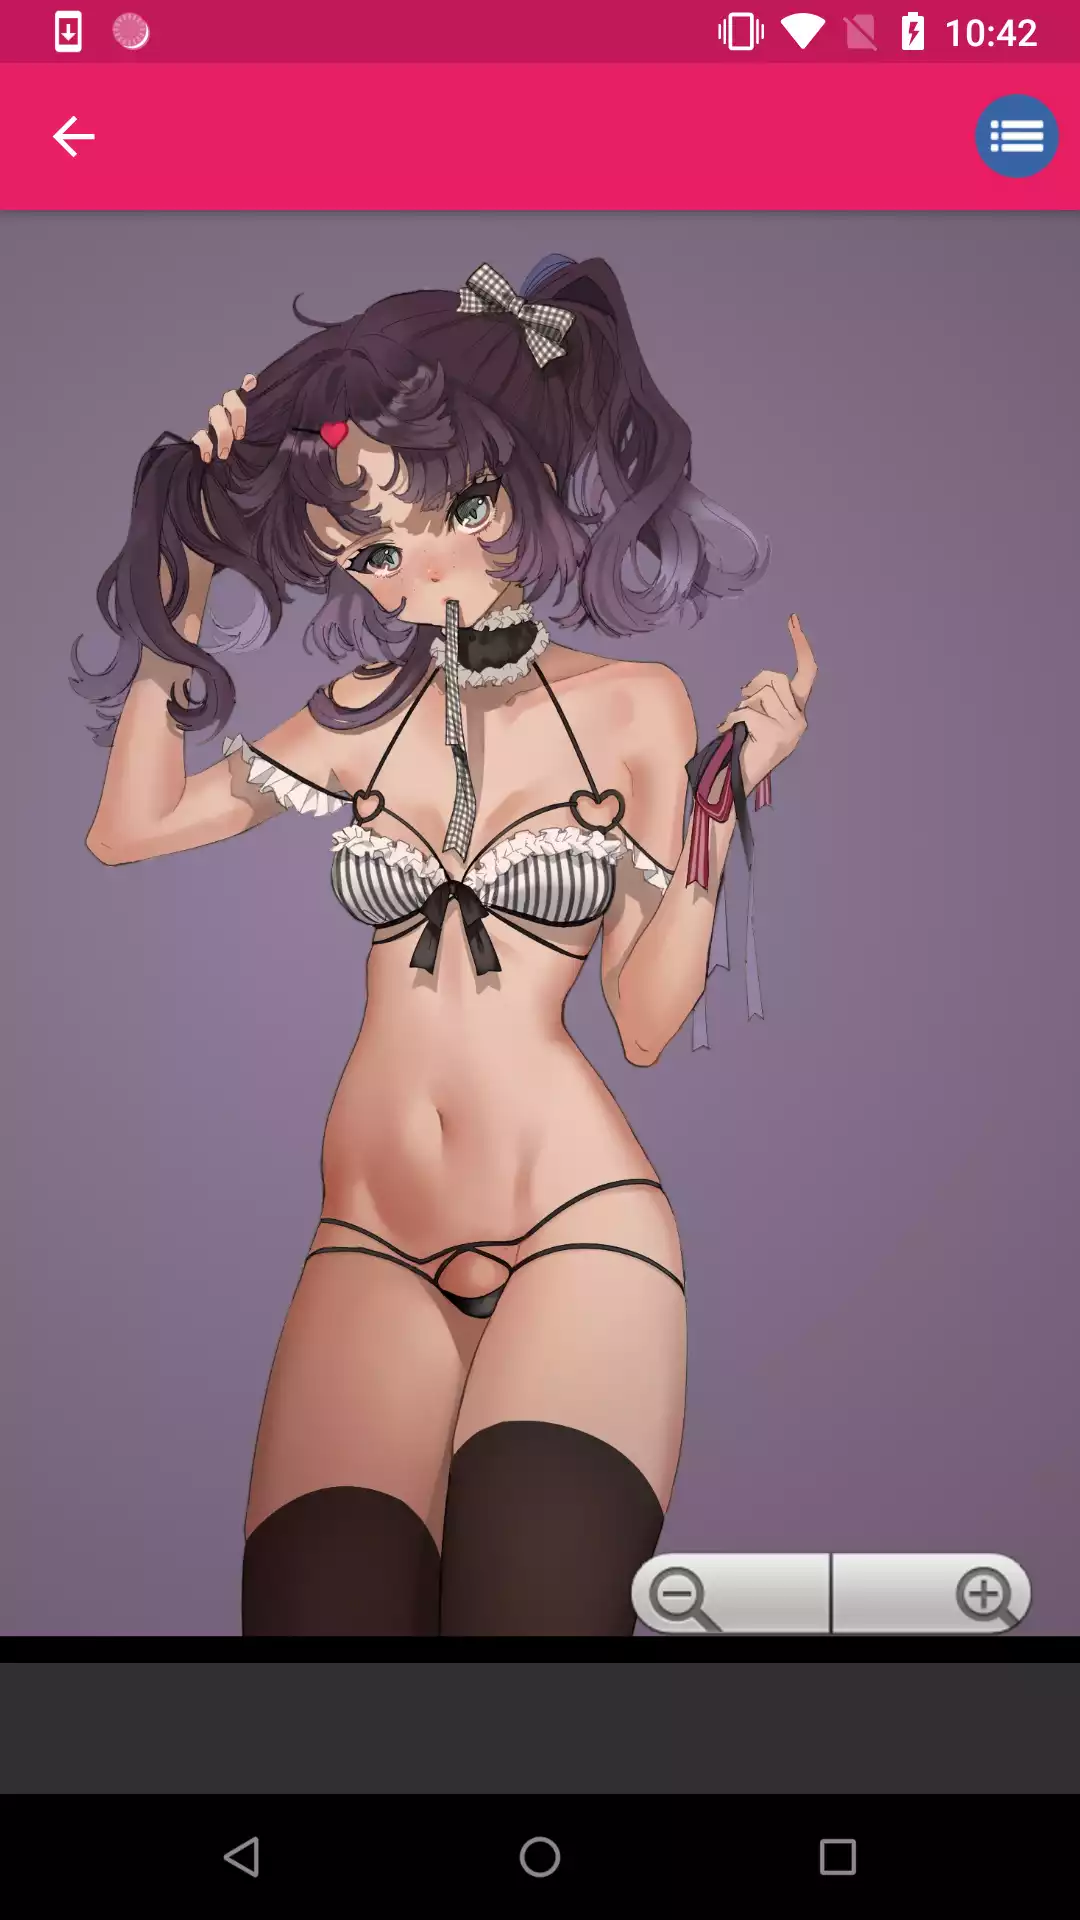 Sexy Anime Girls Wallpapers porn,hot,app,star,wallpapers,apk,wallpaper,topless,download,android,puzzle,hentai,backgrounds,erotic,anime,sissy,girls,panties,sexy,pics,offline,and,pornstarphoto,henti,apps